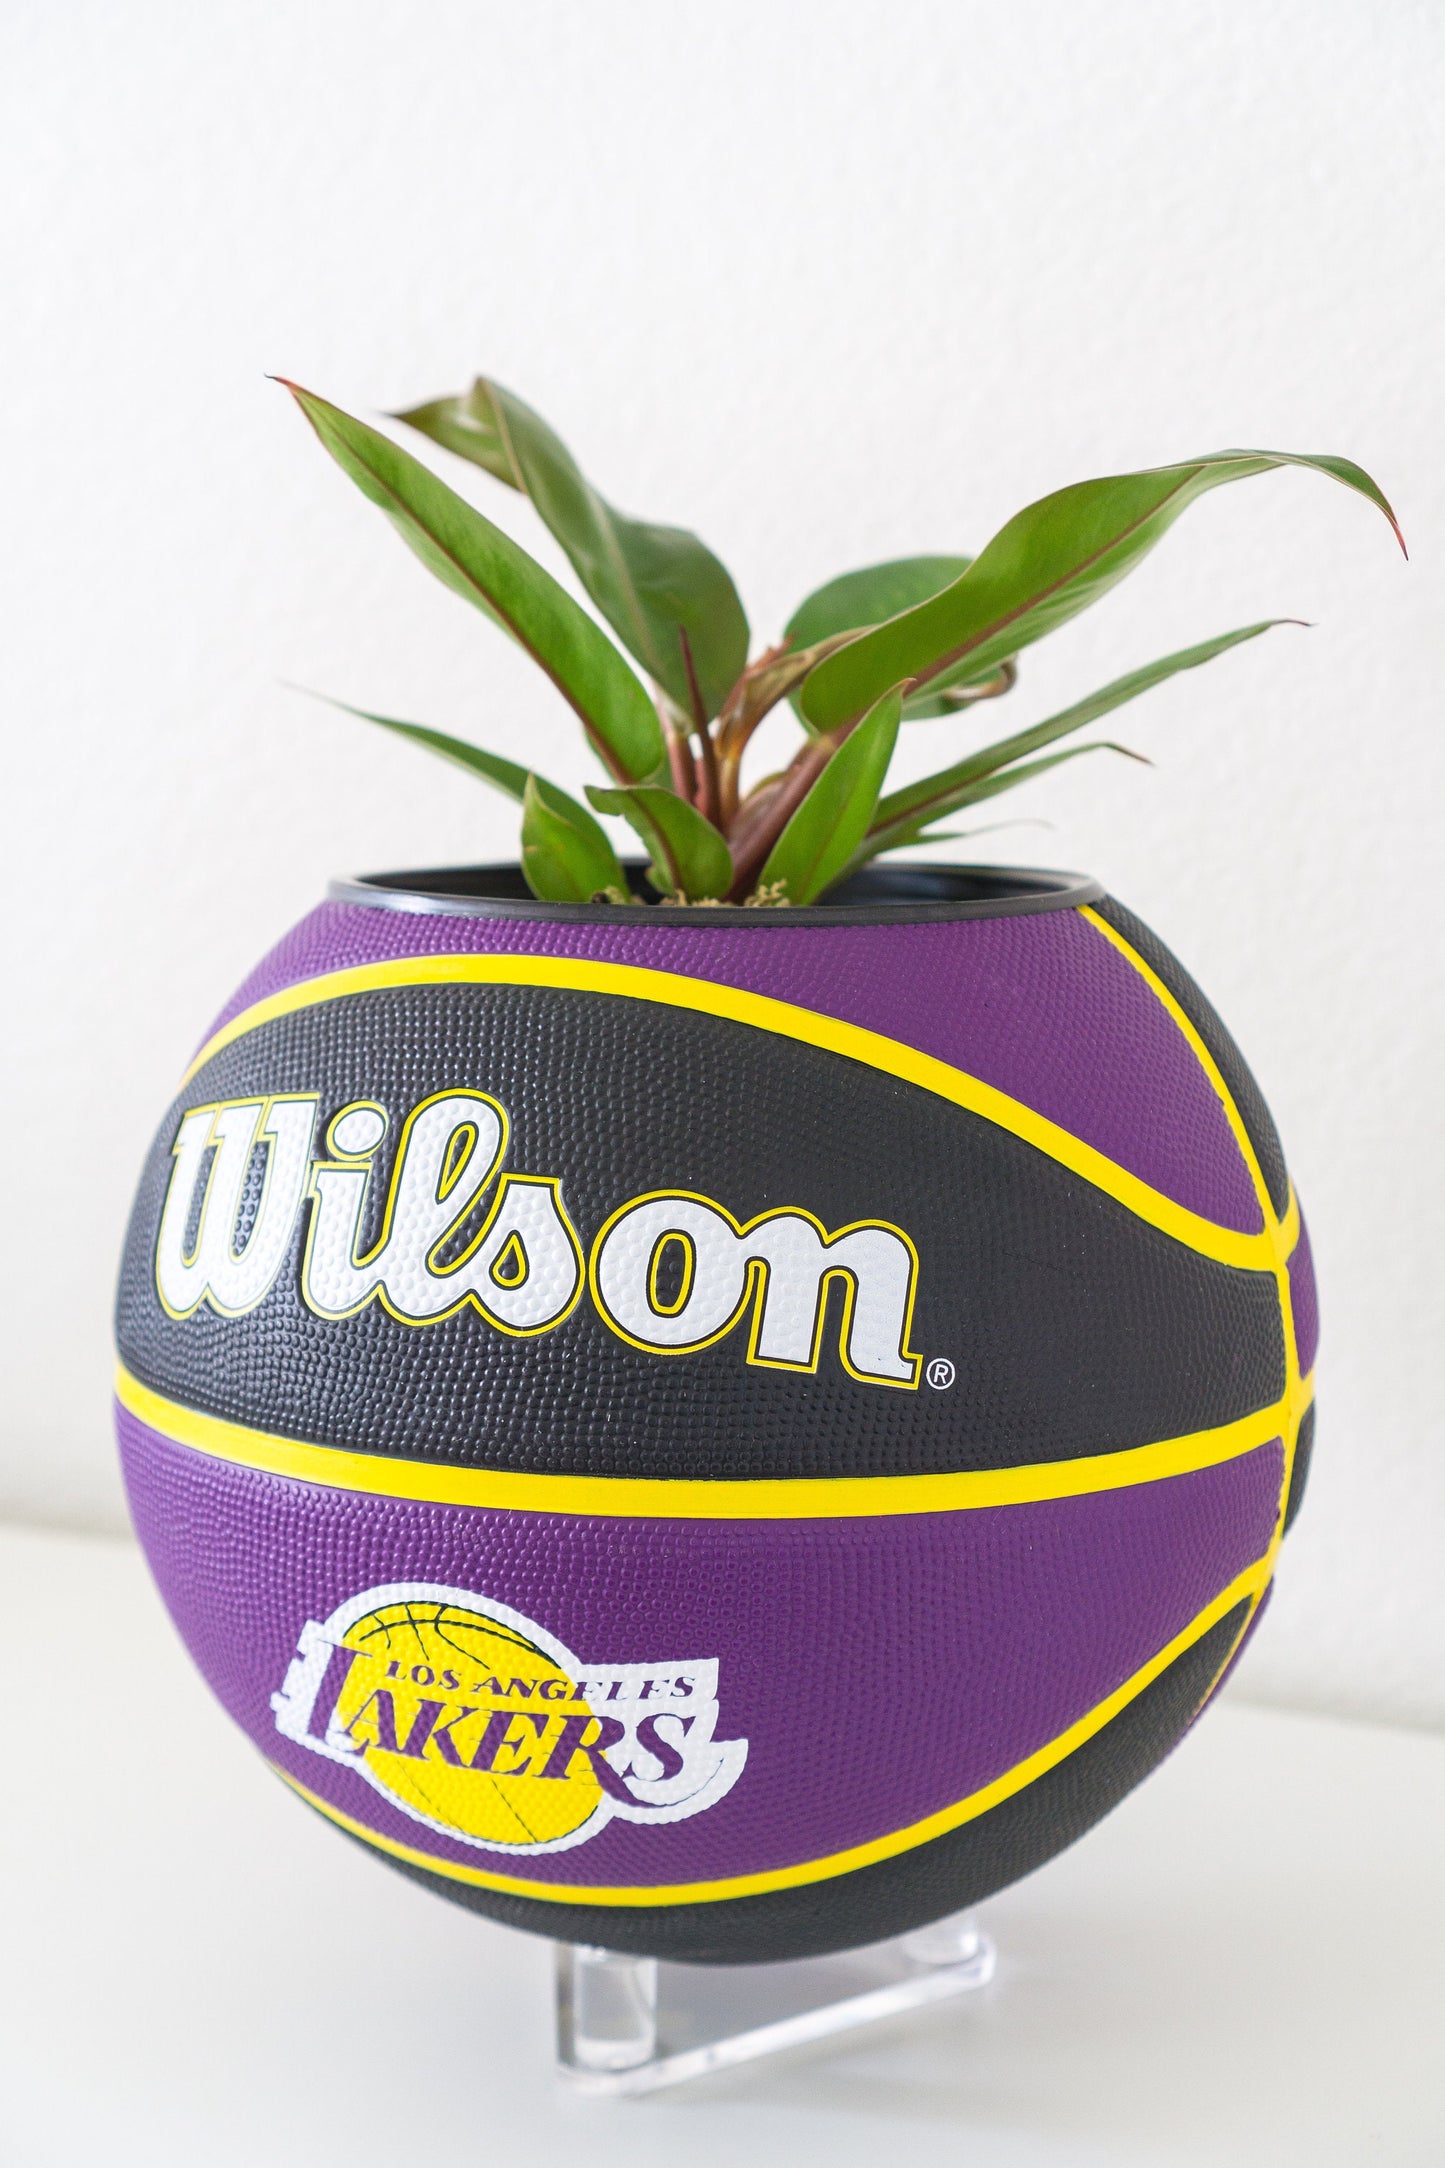 plntrs - NBA Wilson Los Angeles Lakers Tribute Basketball Planter - new ball with stand